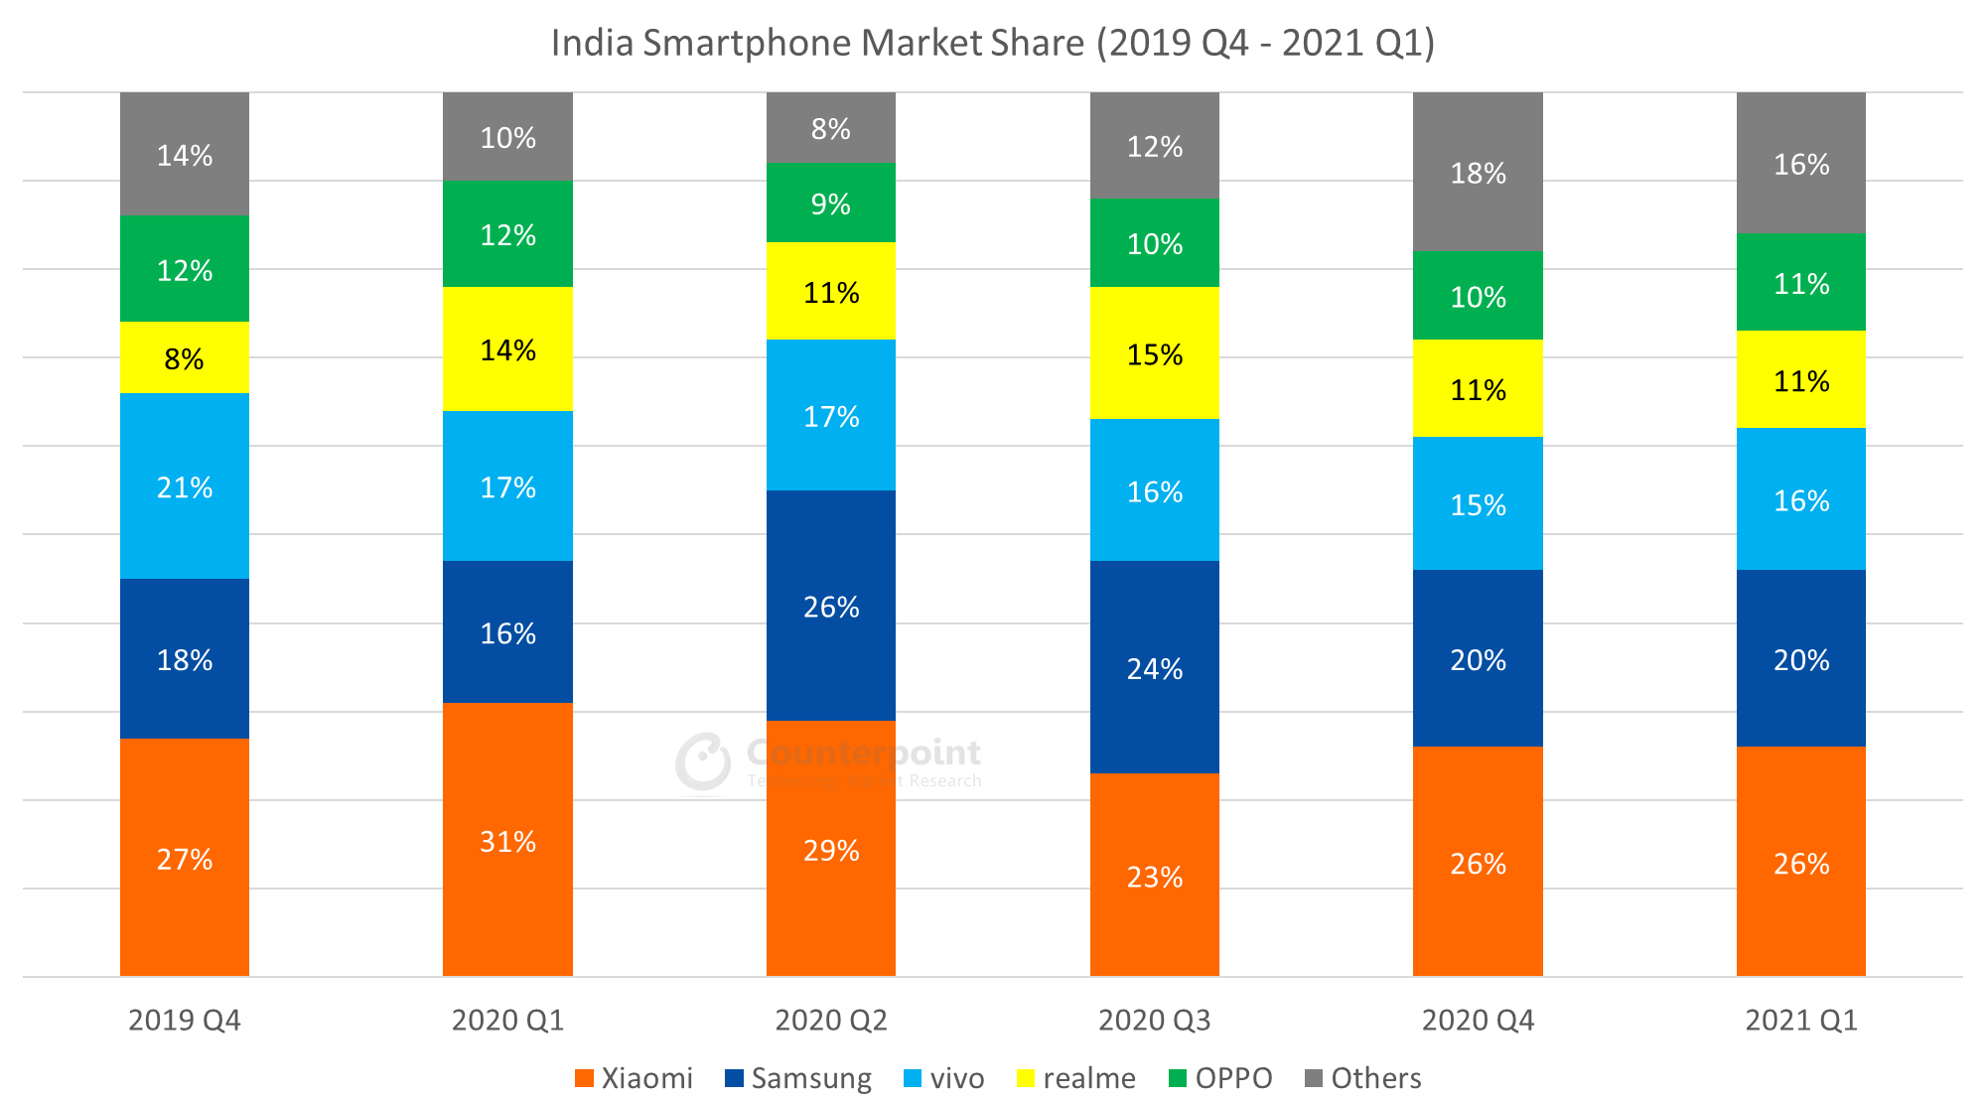 Counterpoint-Research-India-Smartphone-Quarterly-Market-Data-2019Q4-2021Q1